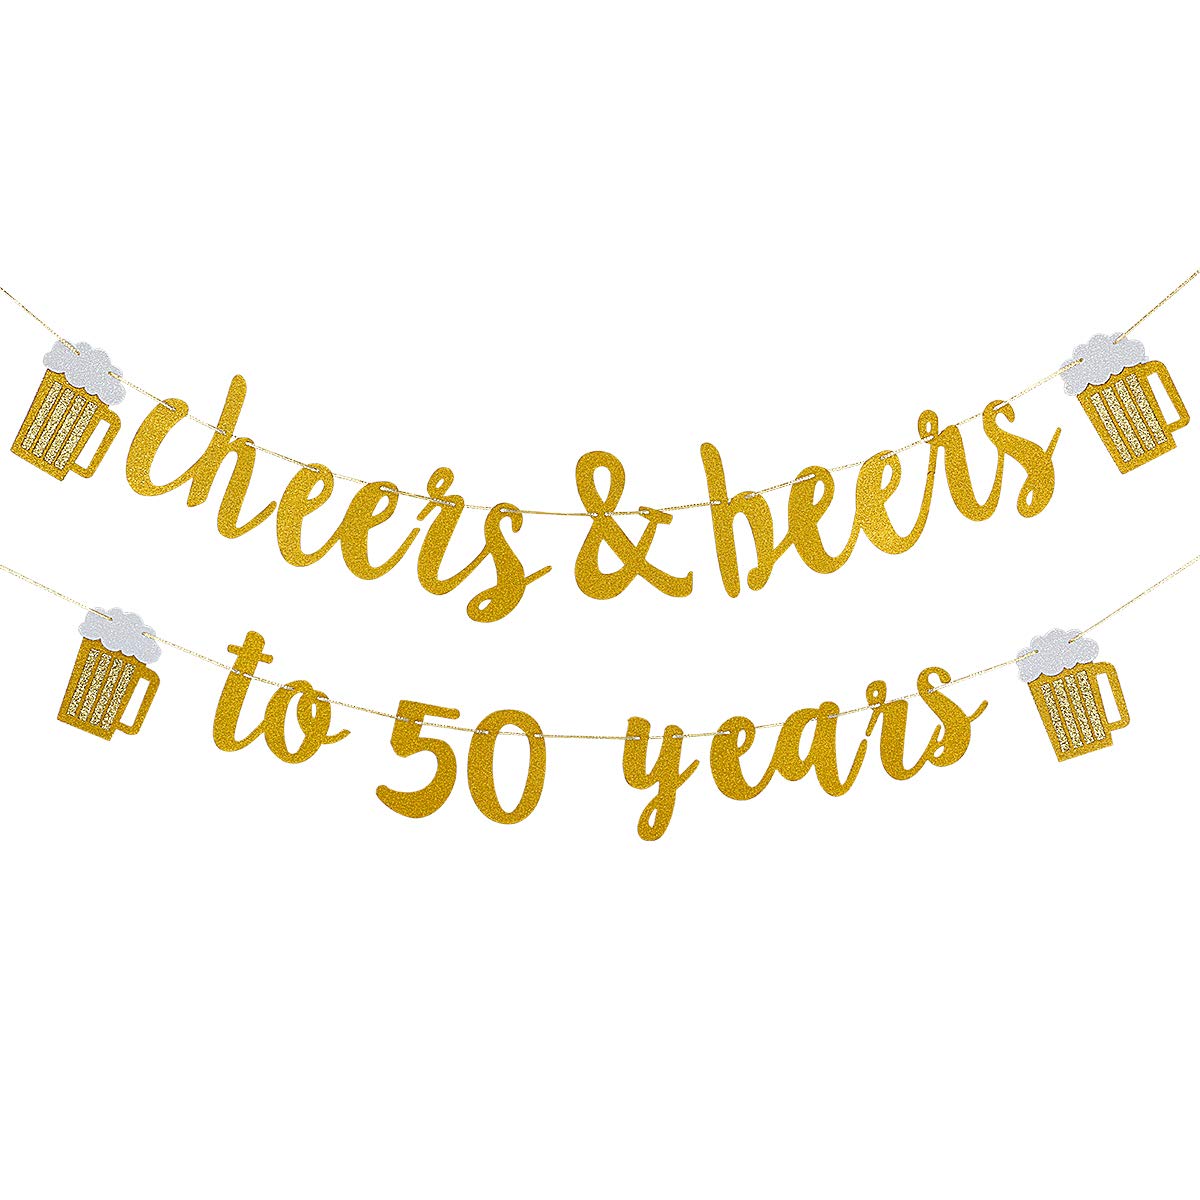 Cheers & Beers to 50 Years Gold Glitter Banner.